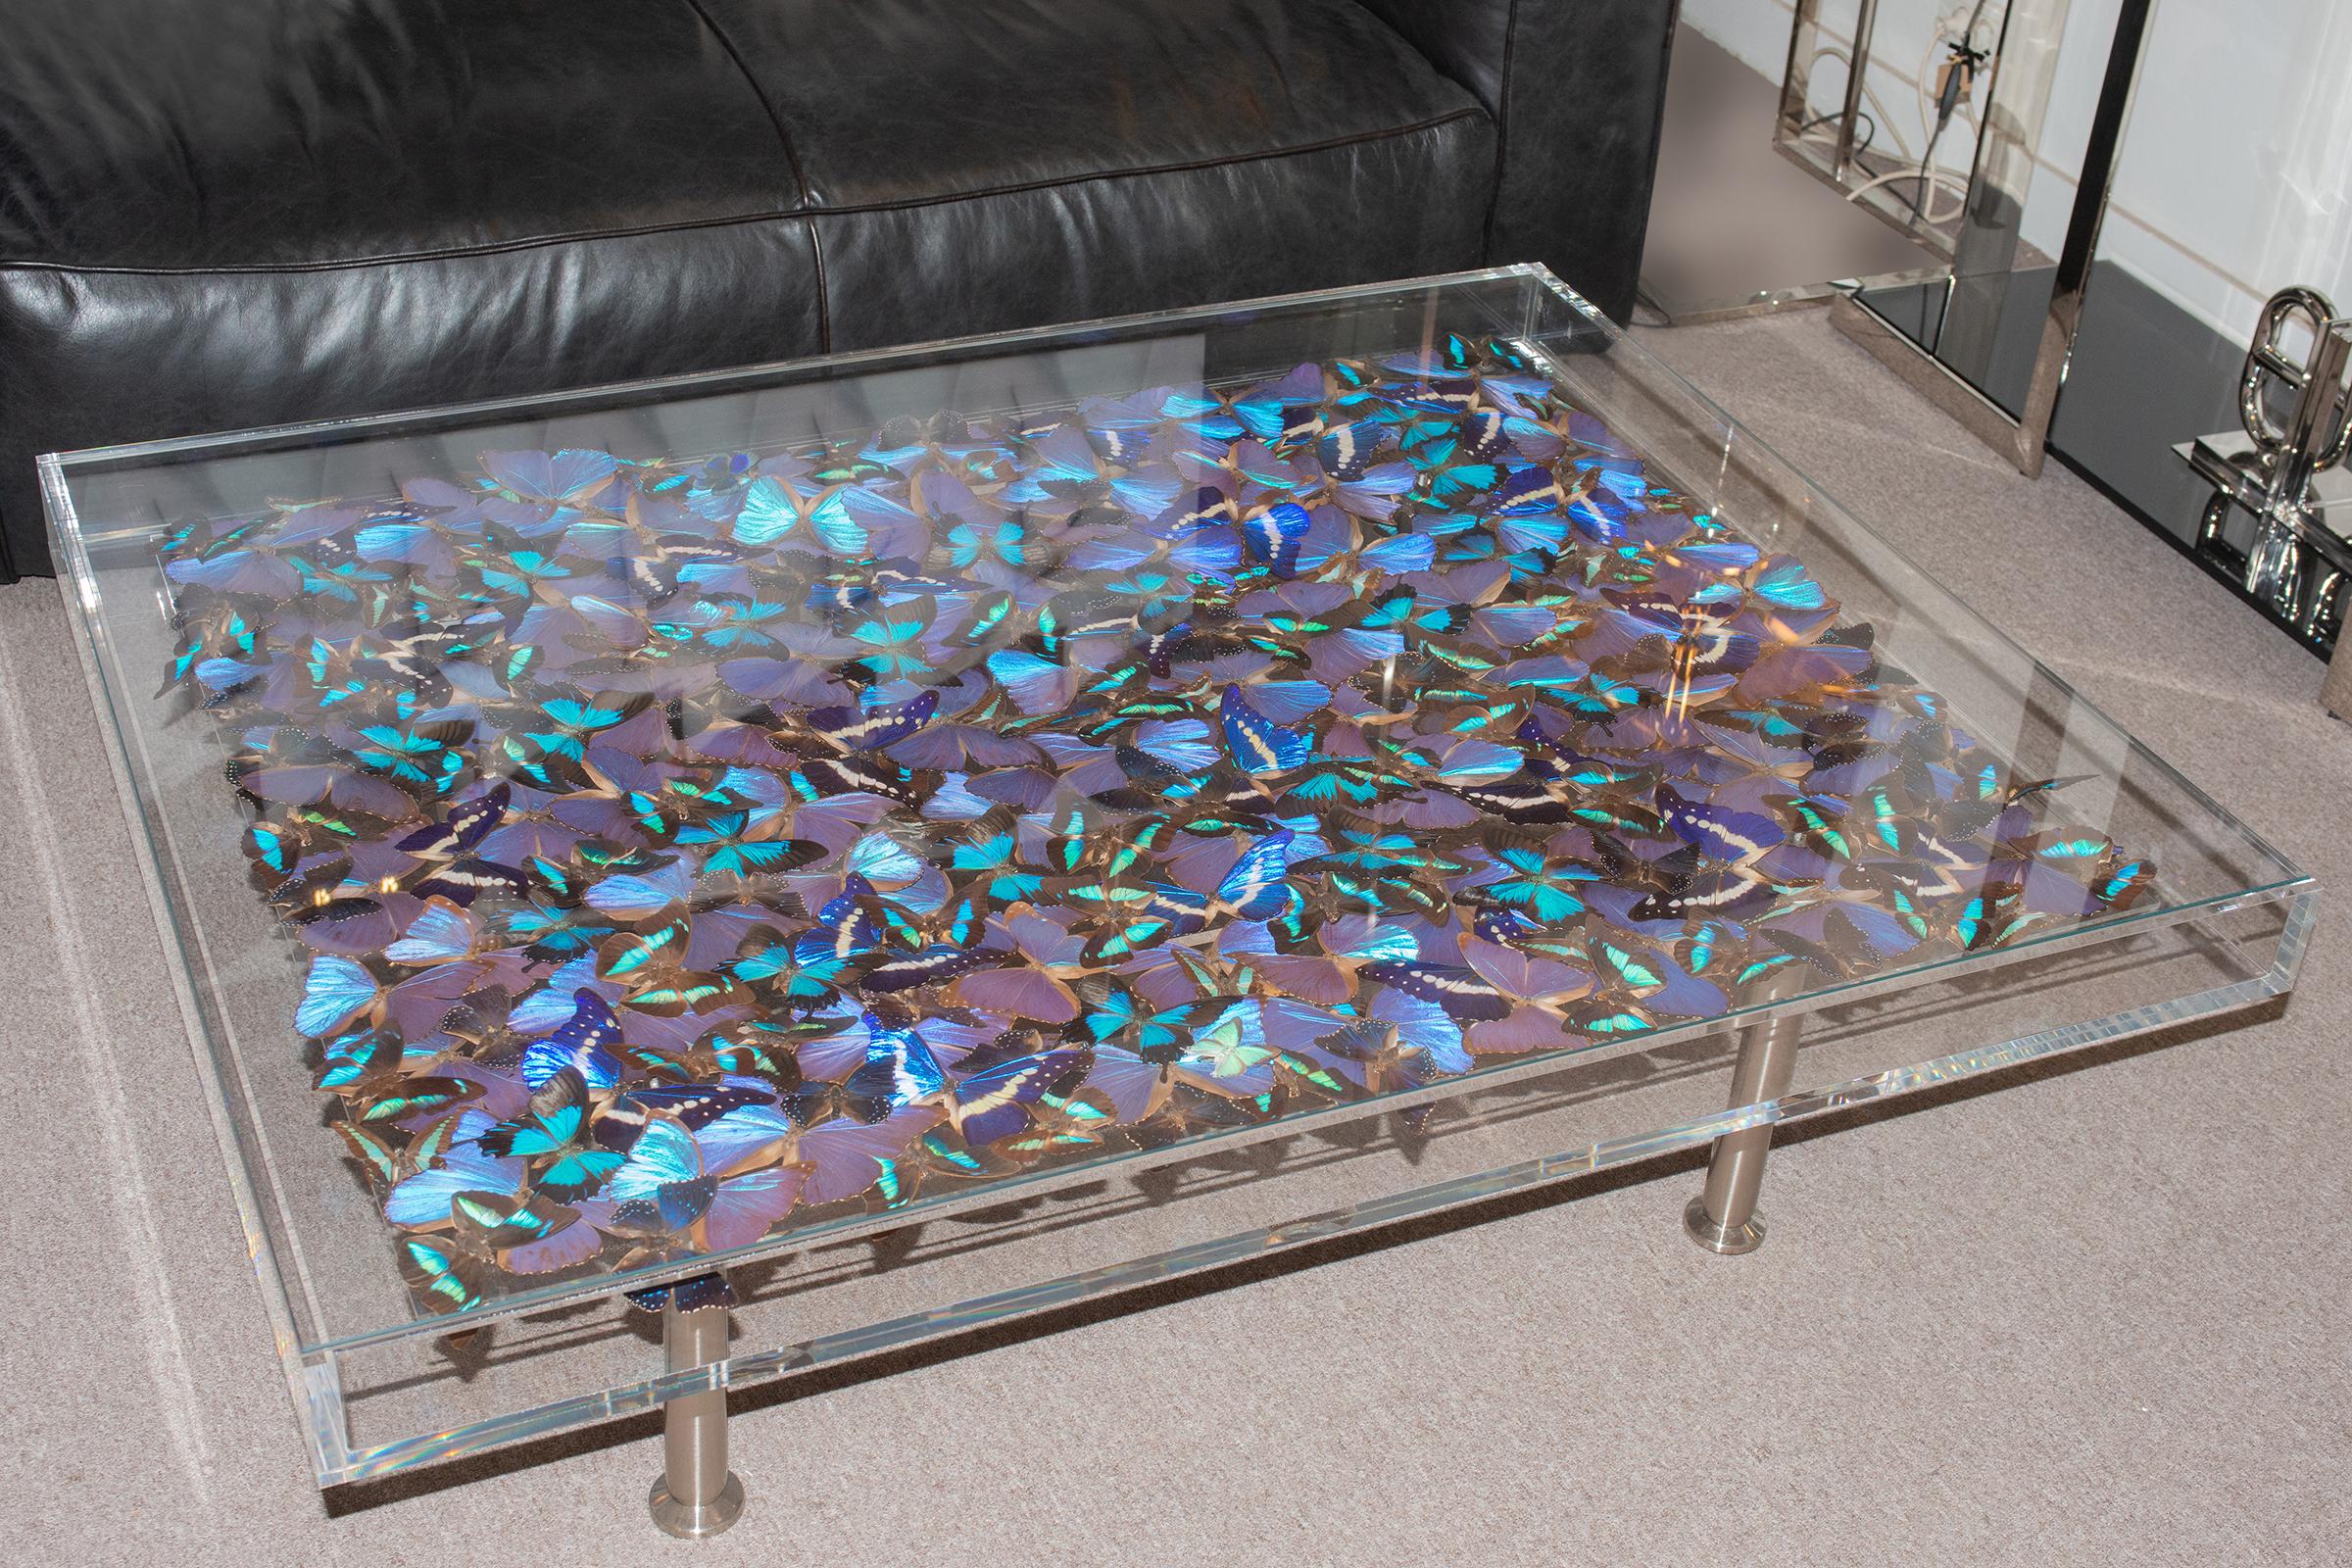 Coffee Table Butterflies Blue with plexiglass top frame and with
clear glass top. With around 247 Butterflies. No specimens are protected.
With 60 butterflies Morpho didius, 30 Morpho Menelaus, 23 Papilio Ulysses, 
15 Graphium Sarpedon, 50 Prepona